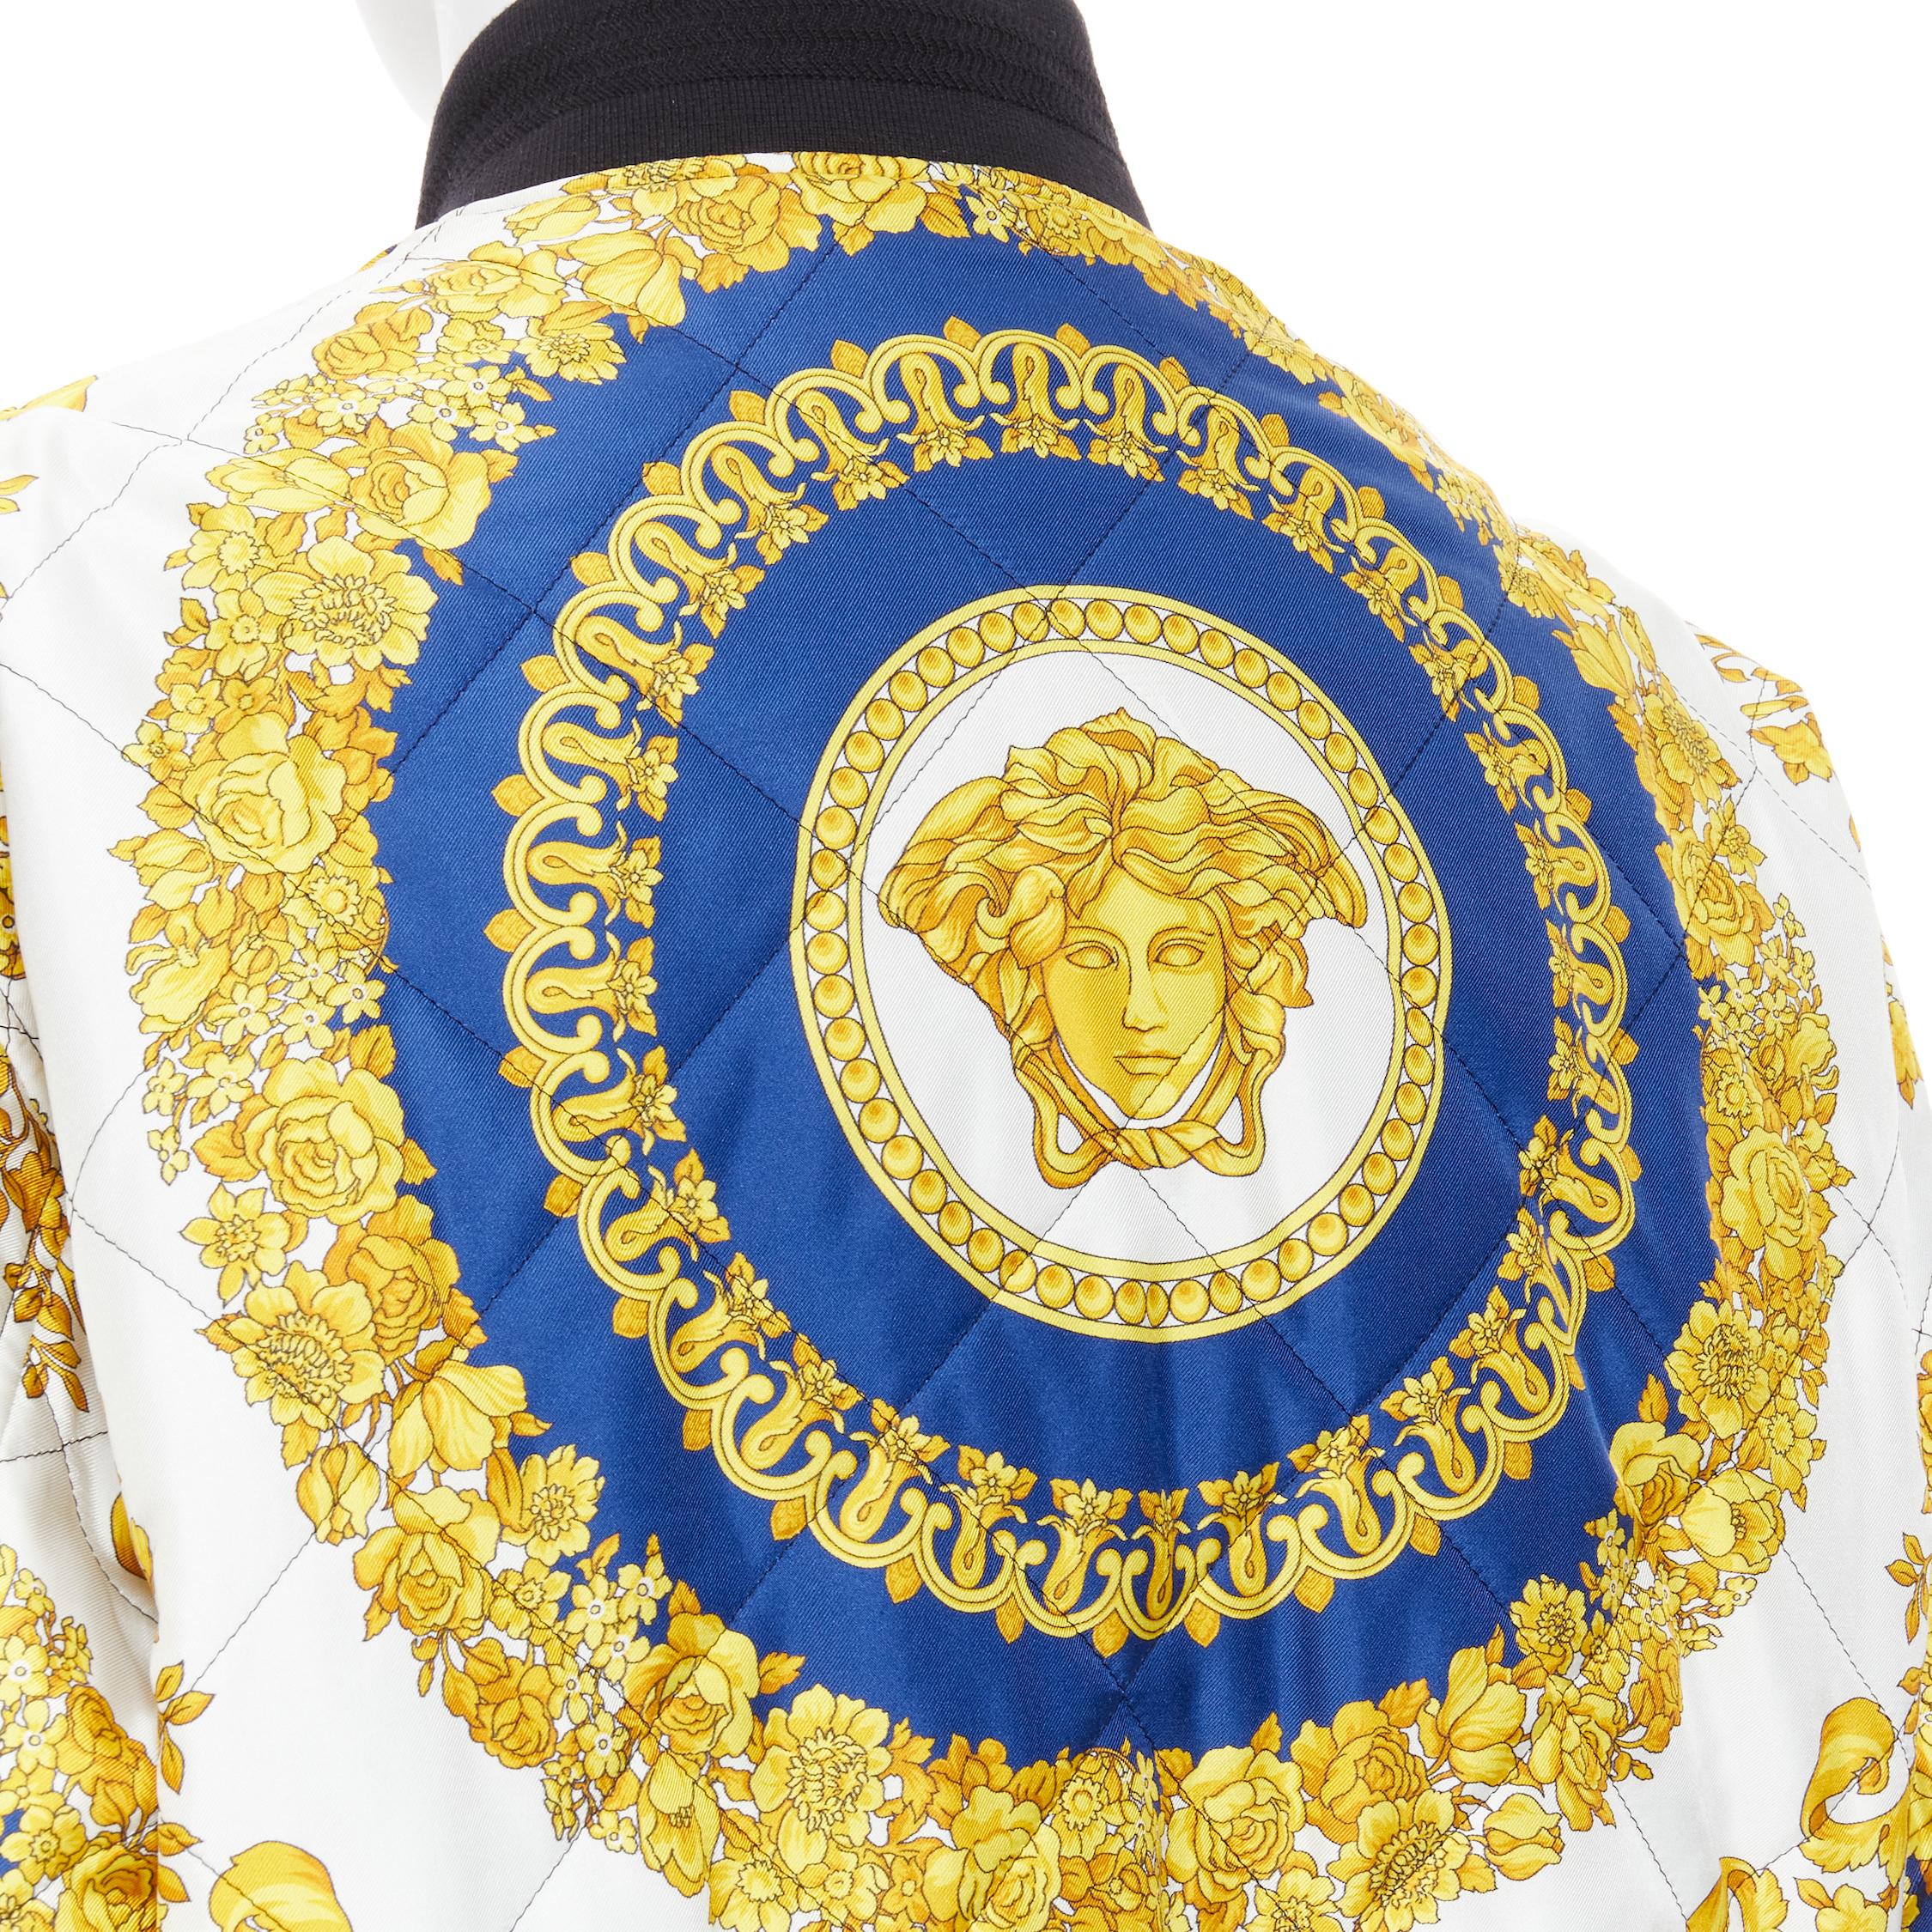 new VERSACE royal blue gold Medusa Barocco diamond quilted bomber jacket IT52 XL 
Reference: TGAS/B01485 
Brand: Versace 
Designer: Donatella Versace 
Material: Silk 
Color: Gold 
Pattern: Floral 
Closure: Zip 
Extra Detail: 100% silk. Royal blue